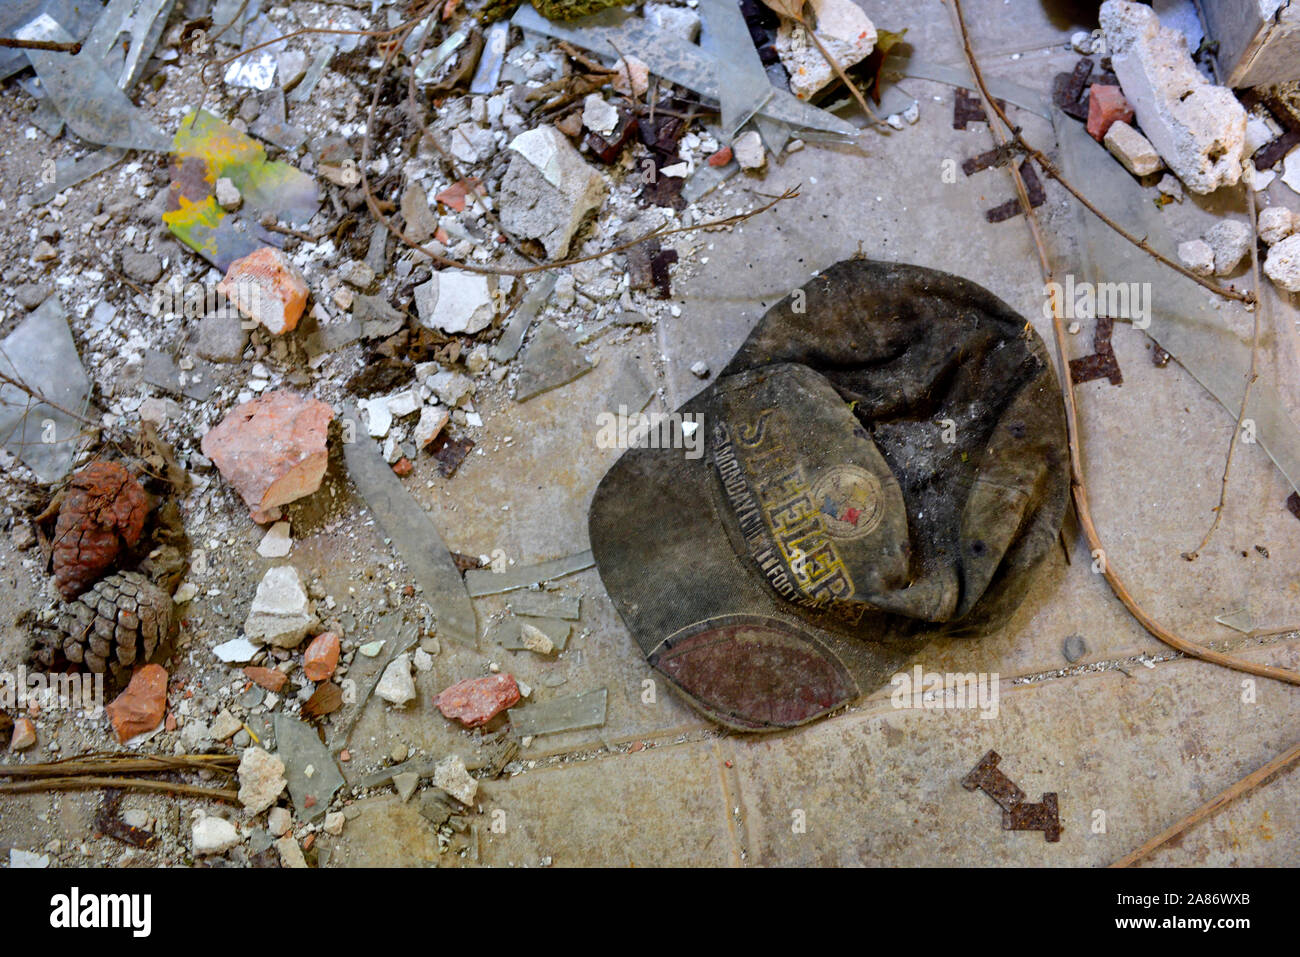 Rubble on floor of derelict building with old discarded Pittsburgh Steelers (football team) peaked baseball cap Stock Photo